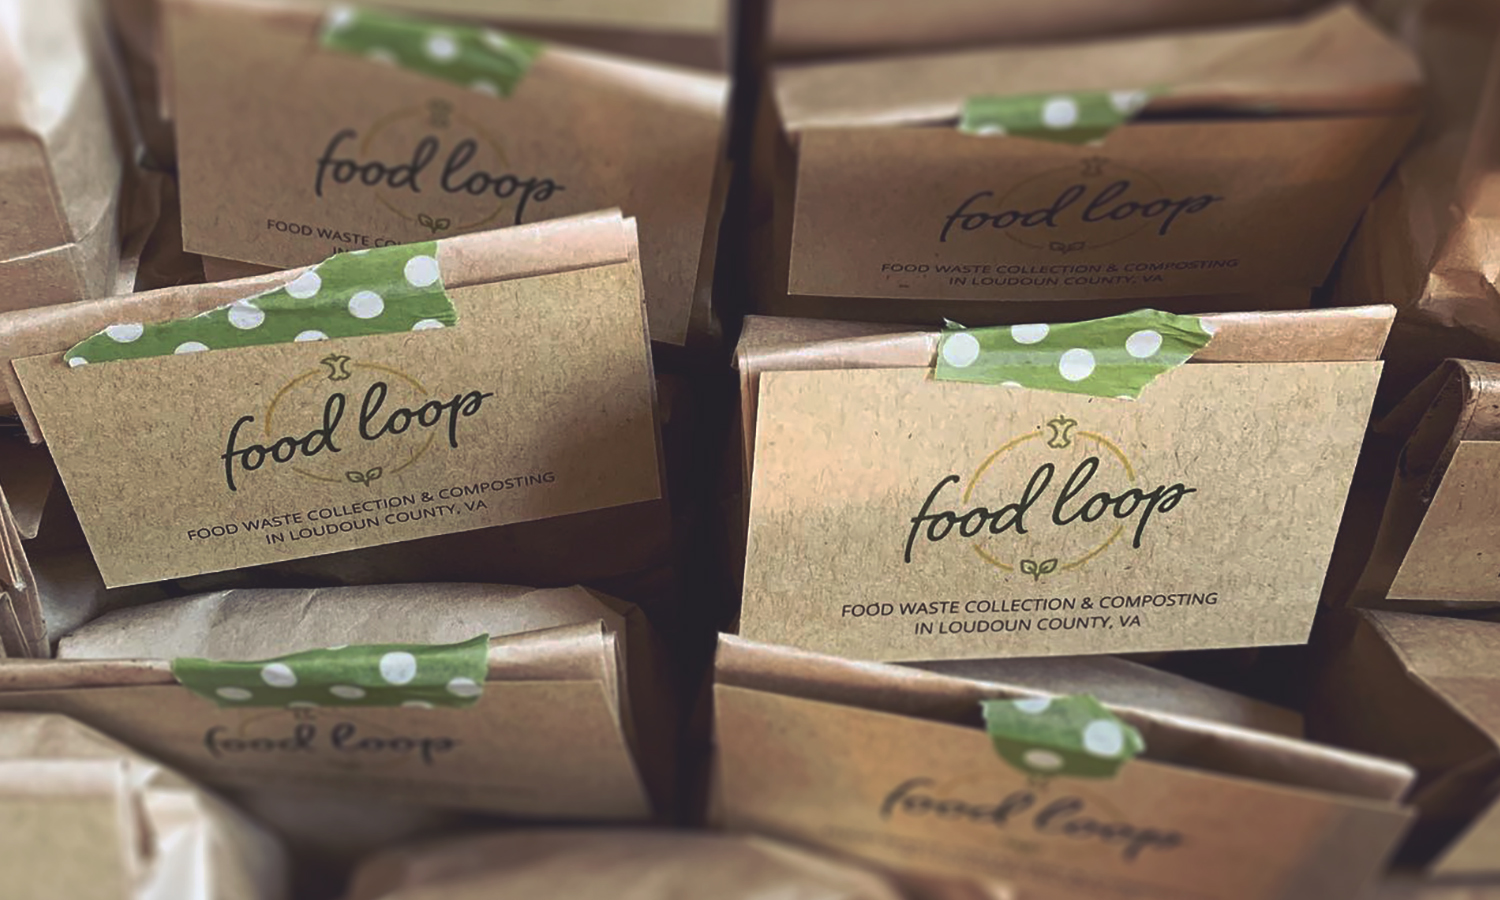 Rows of Food Loop cards on promotional paper bags of compost soil